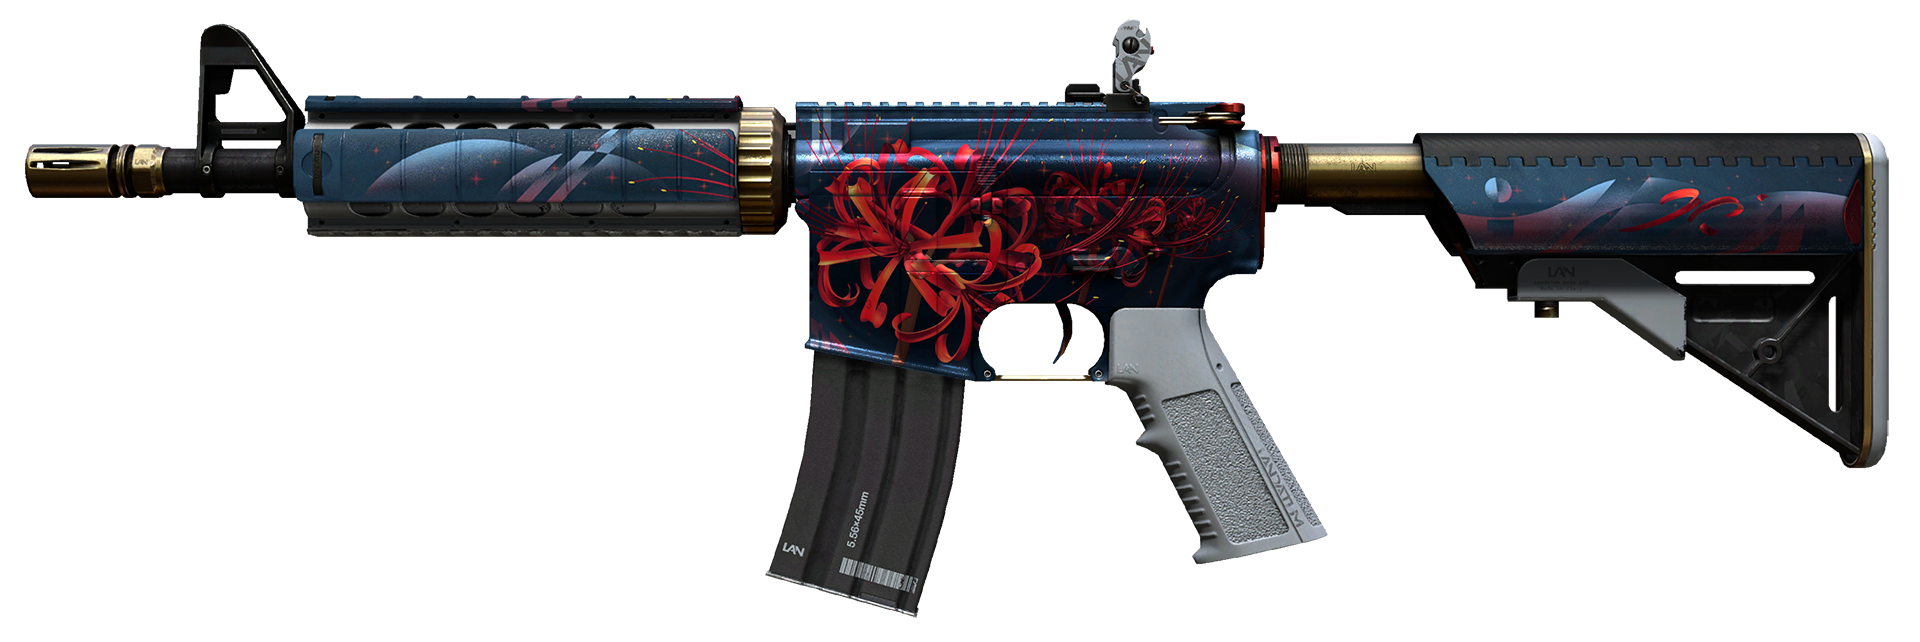 M4A4 Spider Lily Large Rendering